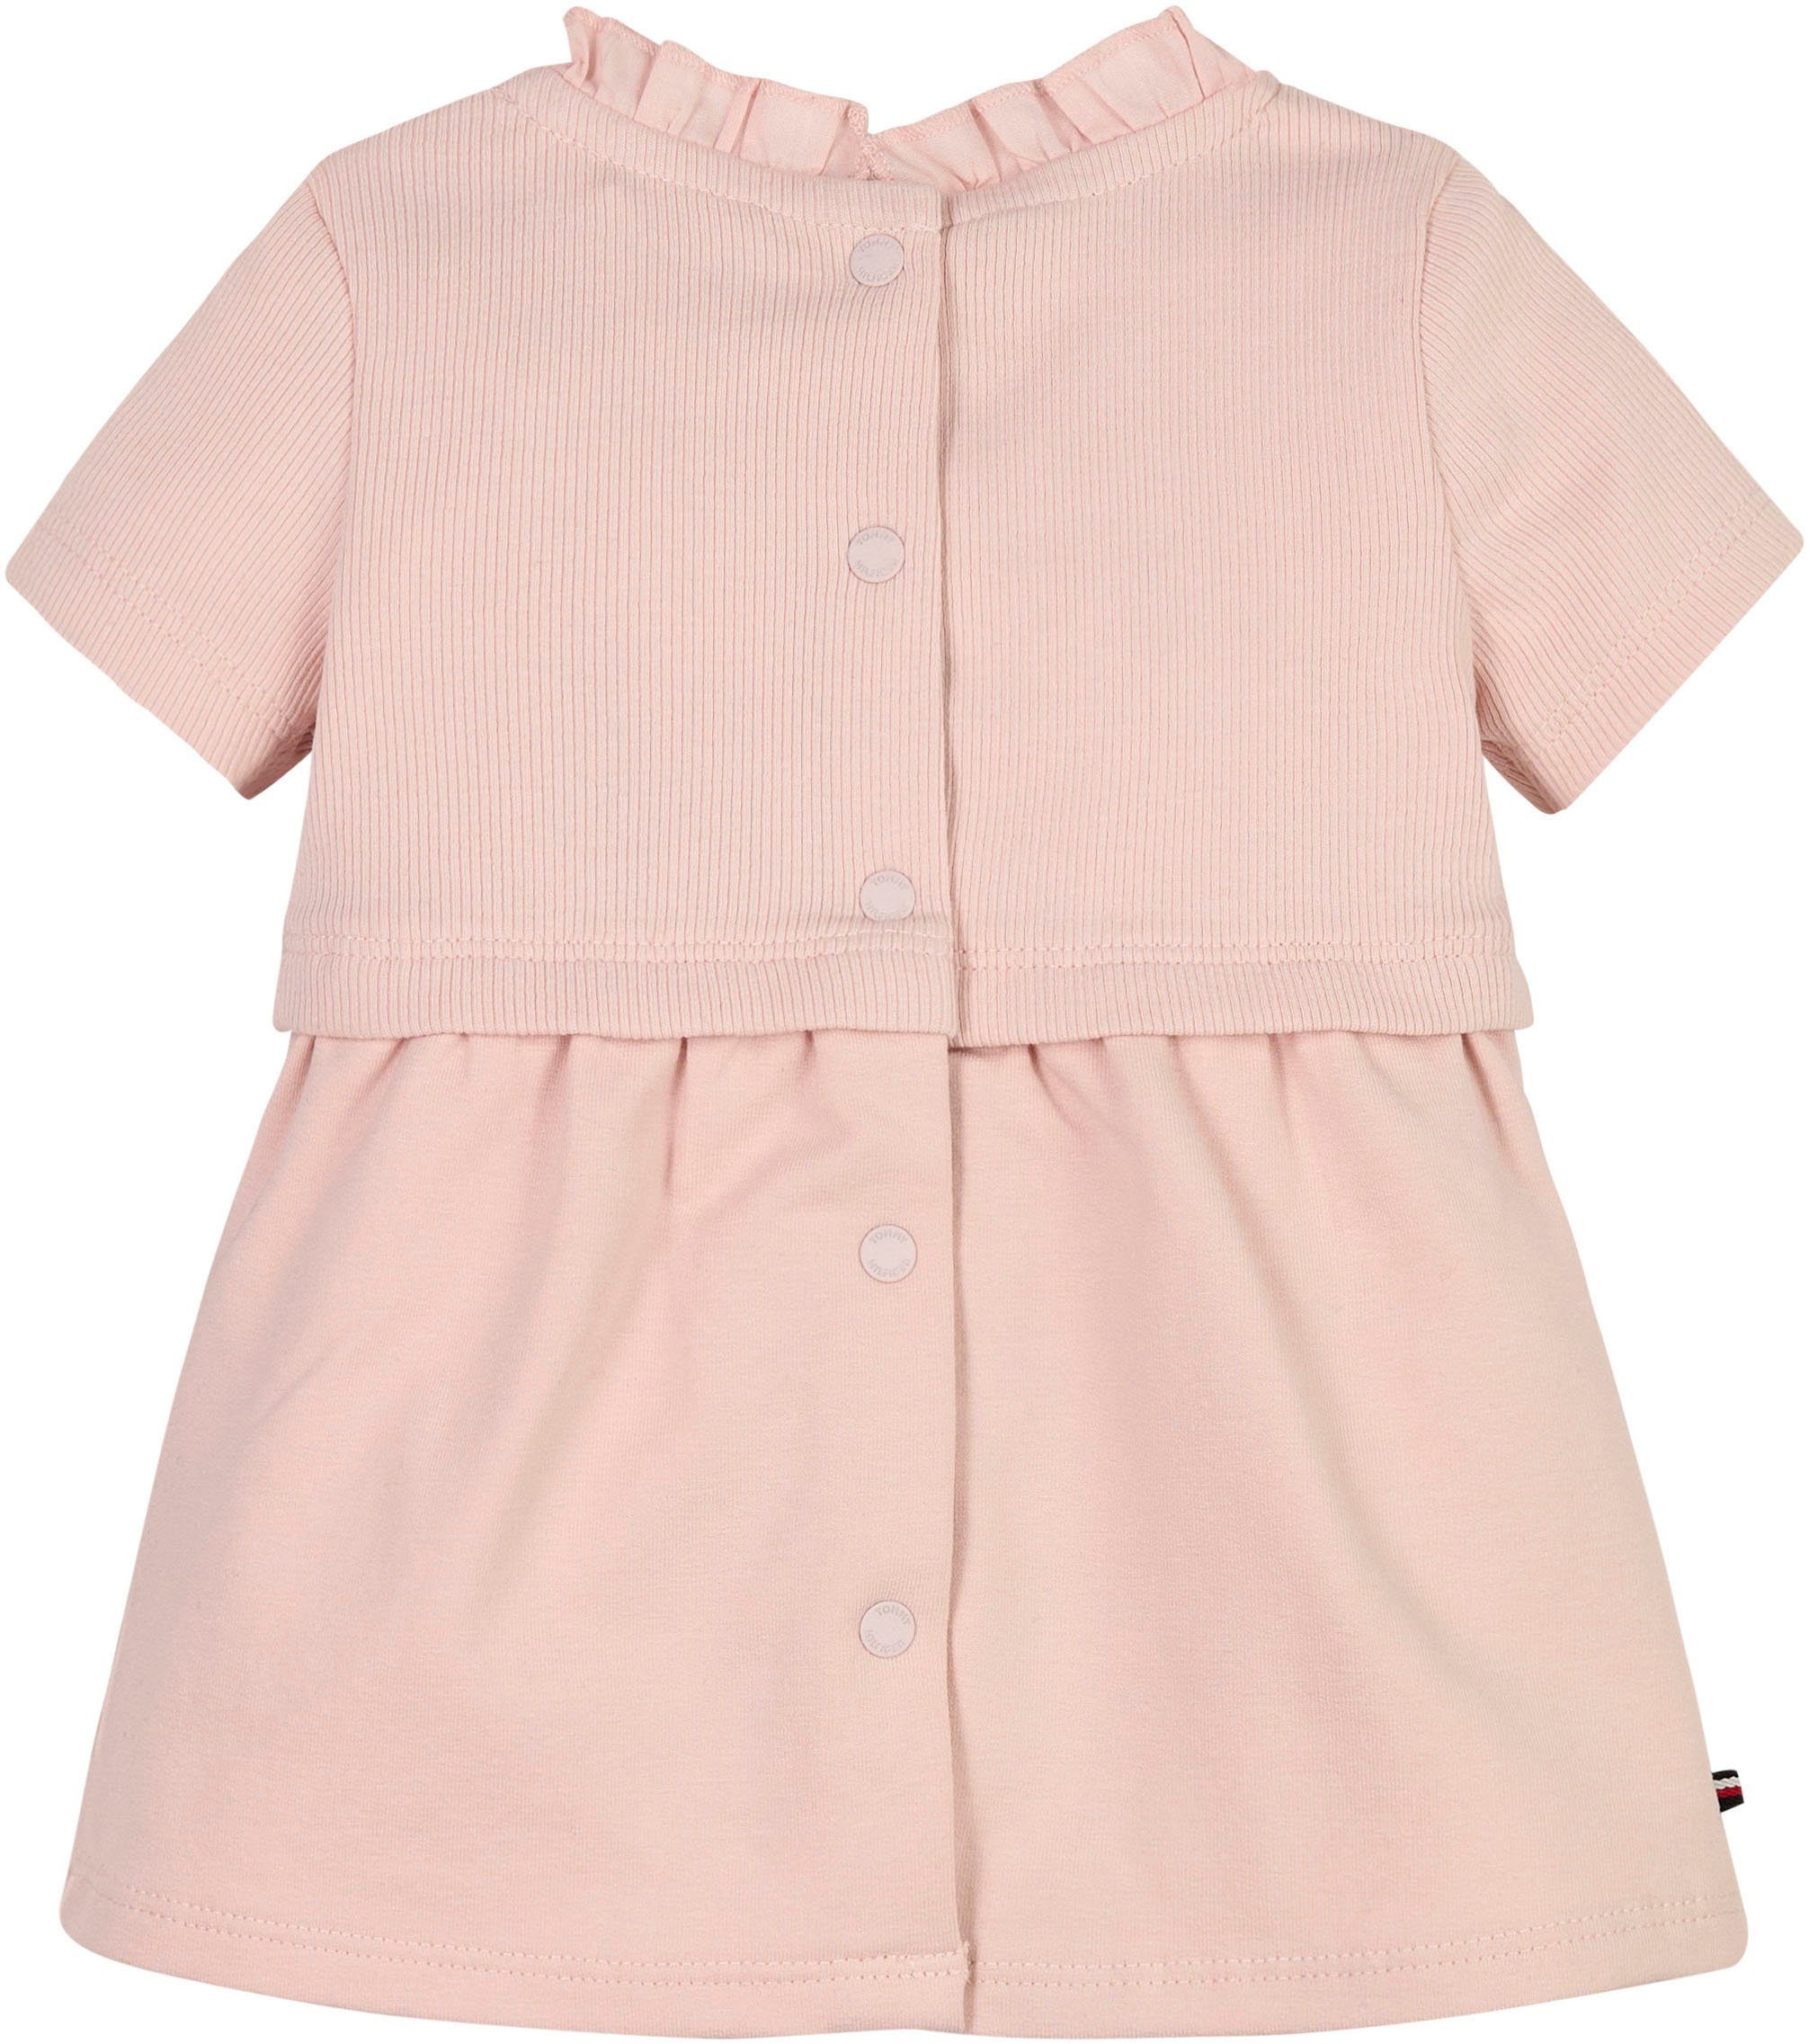 Tommy Whimsy DRESS S/S Hilfiger mit BABY Pink Jerseykleid FLAG Rippenstrick